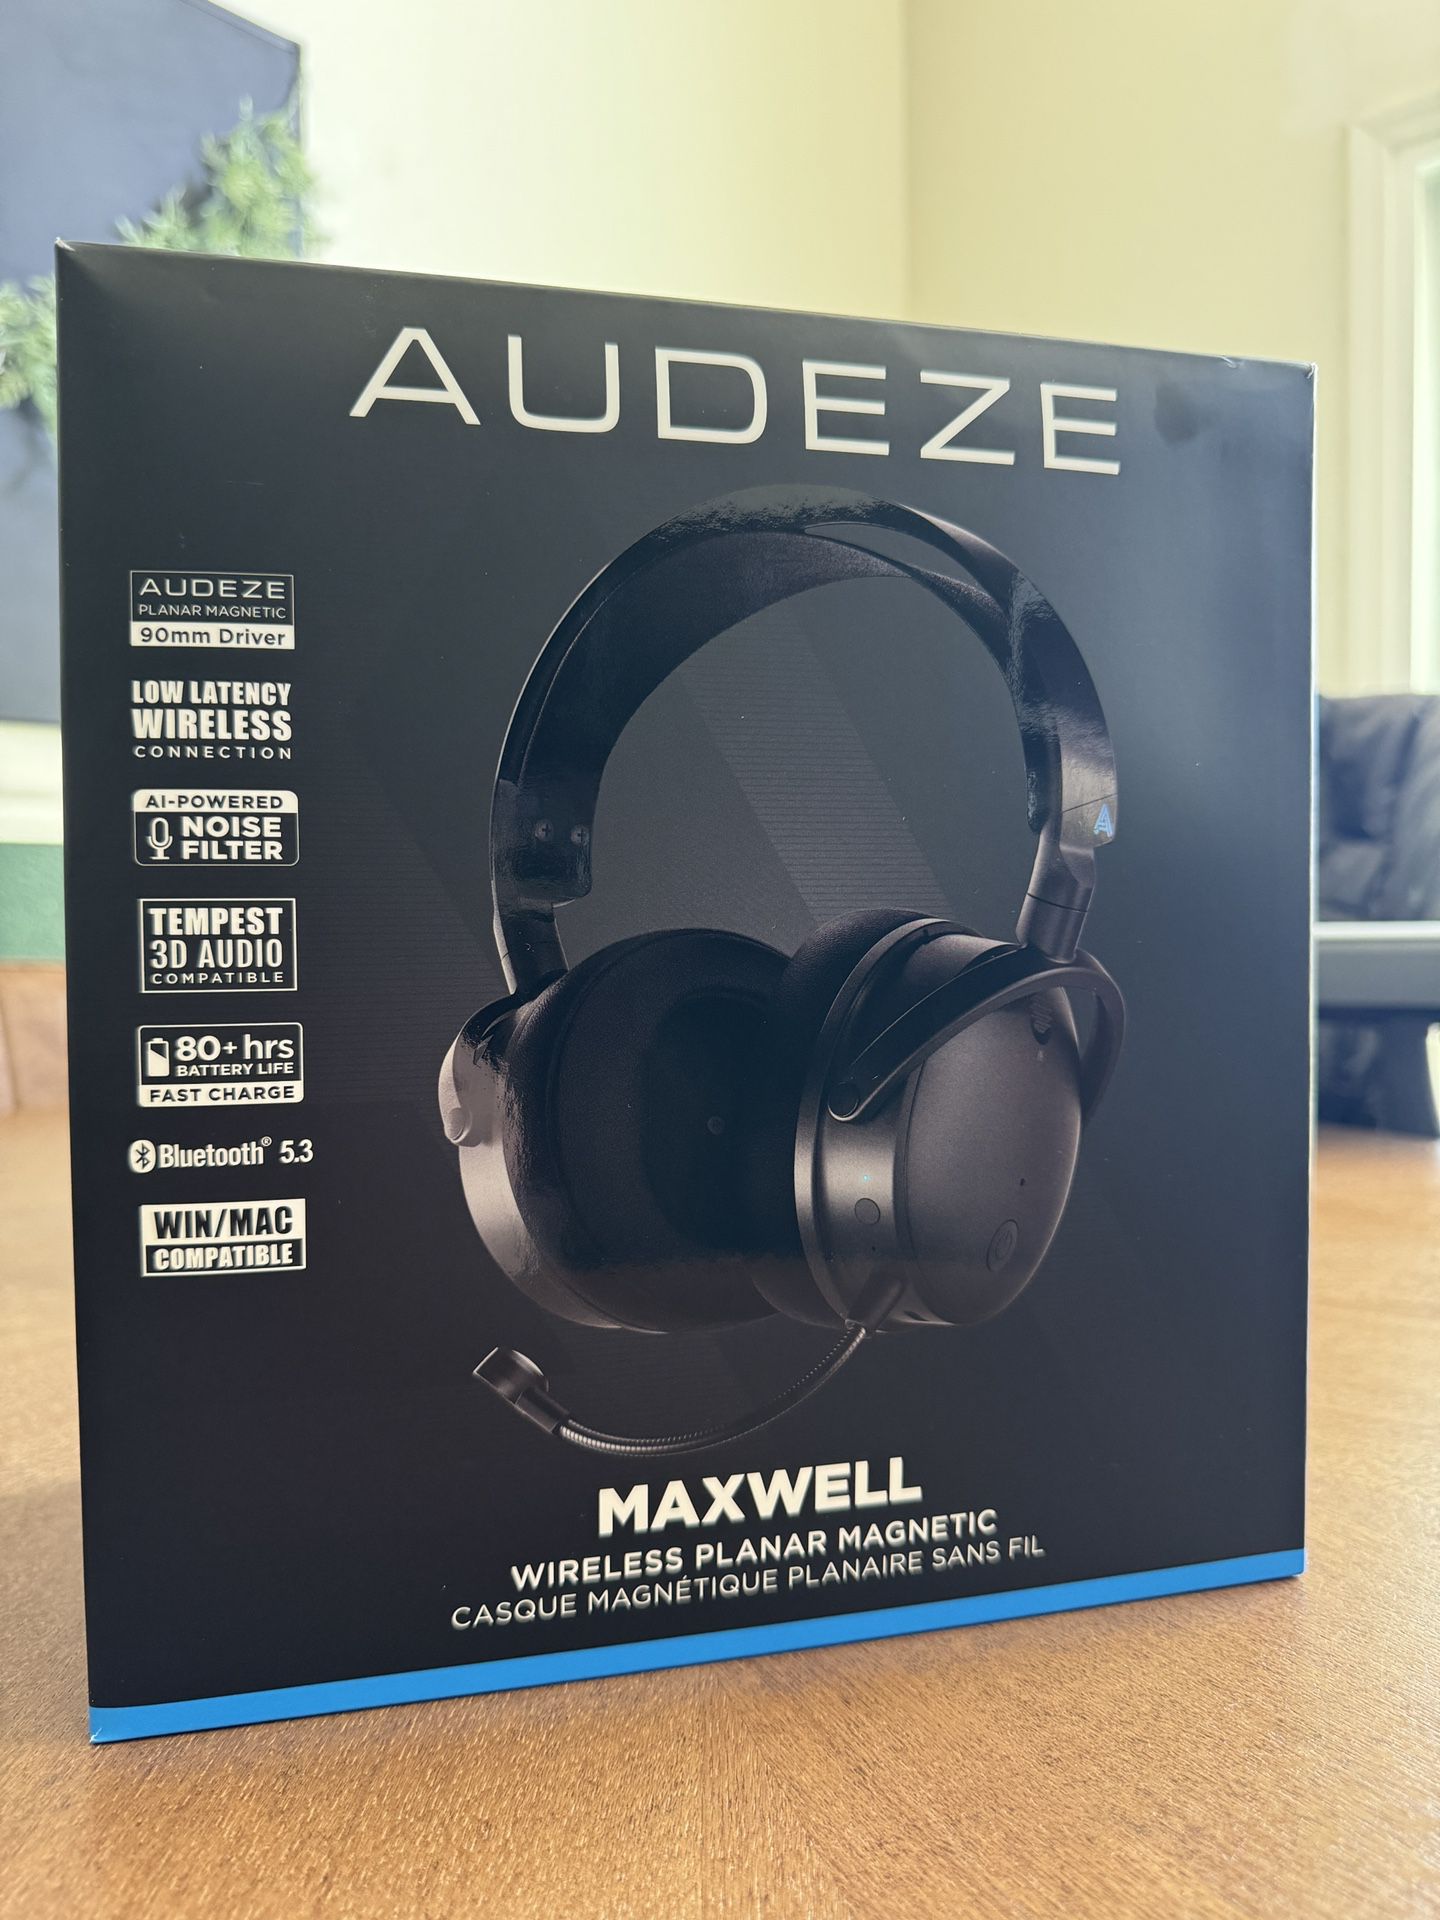 AUDEZE MAXWELL GAMING HEADSET | BRAND NEW | FOR PS5, PC, MAC, & BLUETOOTH